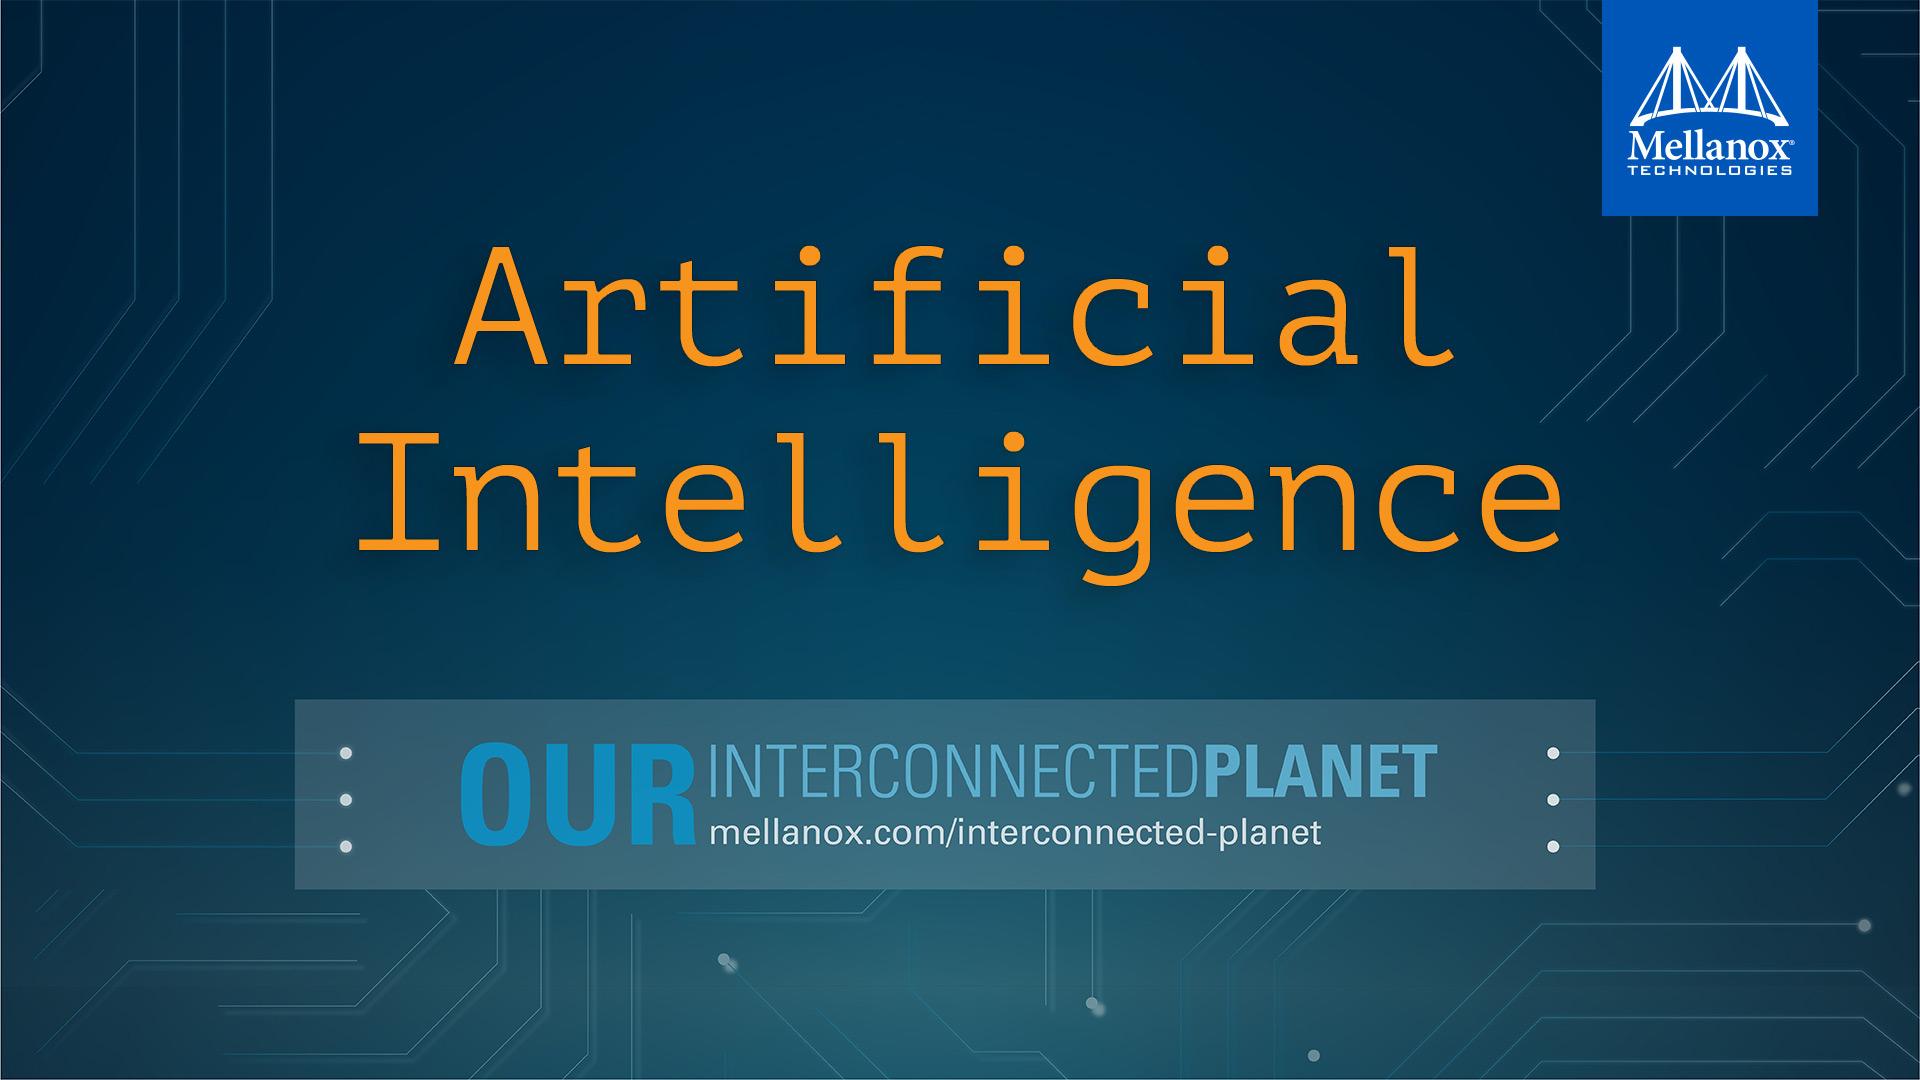 MELLANOX. Our Interconnected Planet